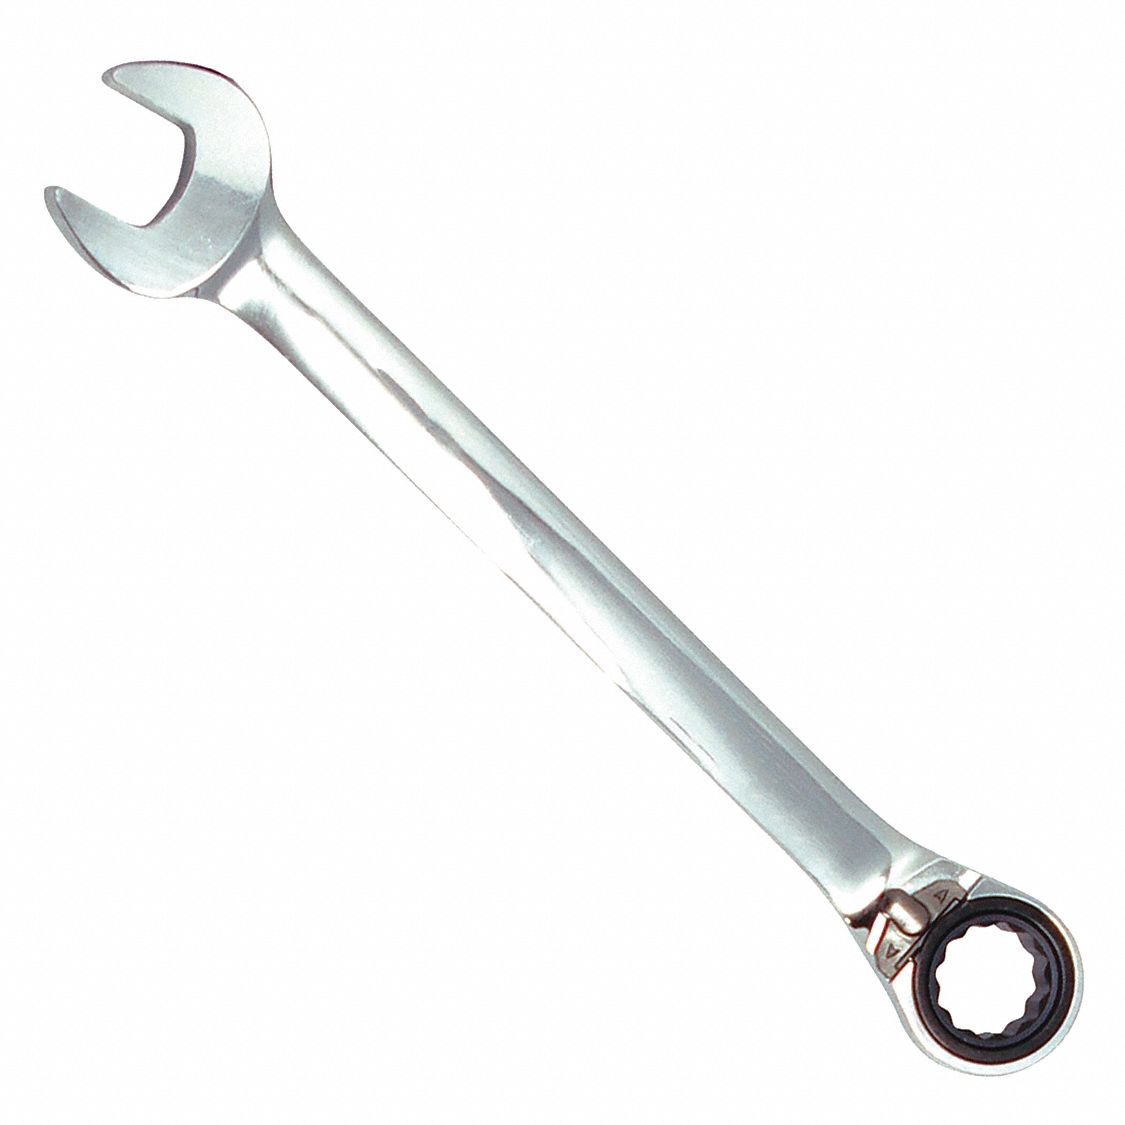 Combination Wrench: Alloy Steel, Chrome, 7/16 in Head Size, 6 1/2 in Overall Lg, Offset